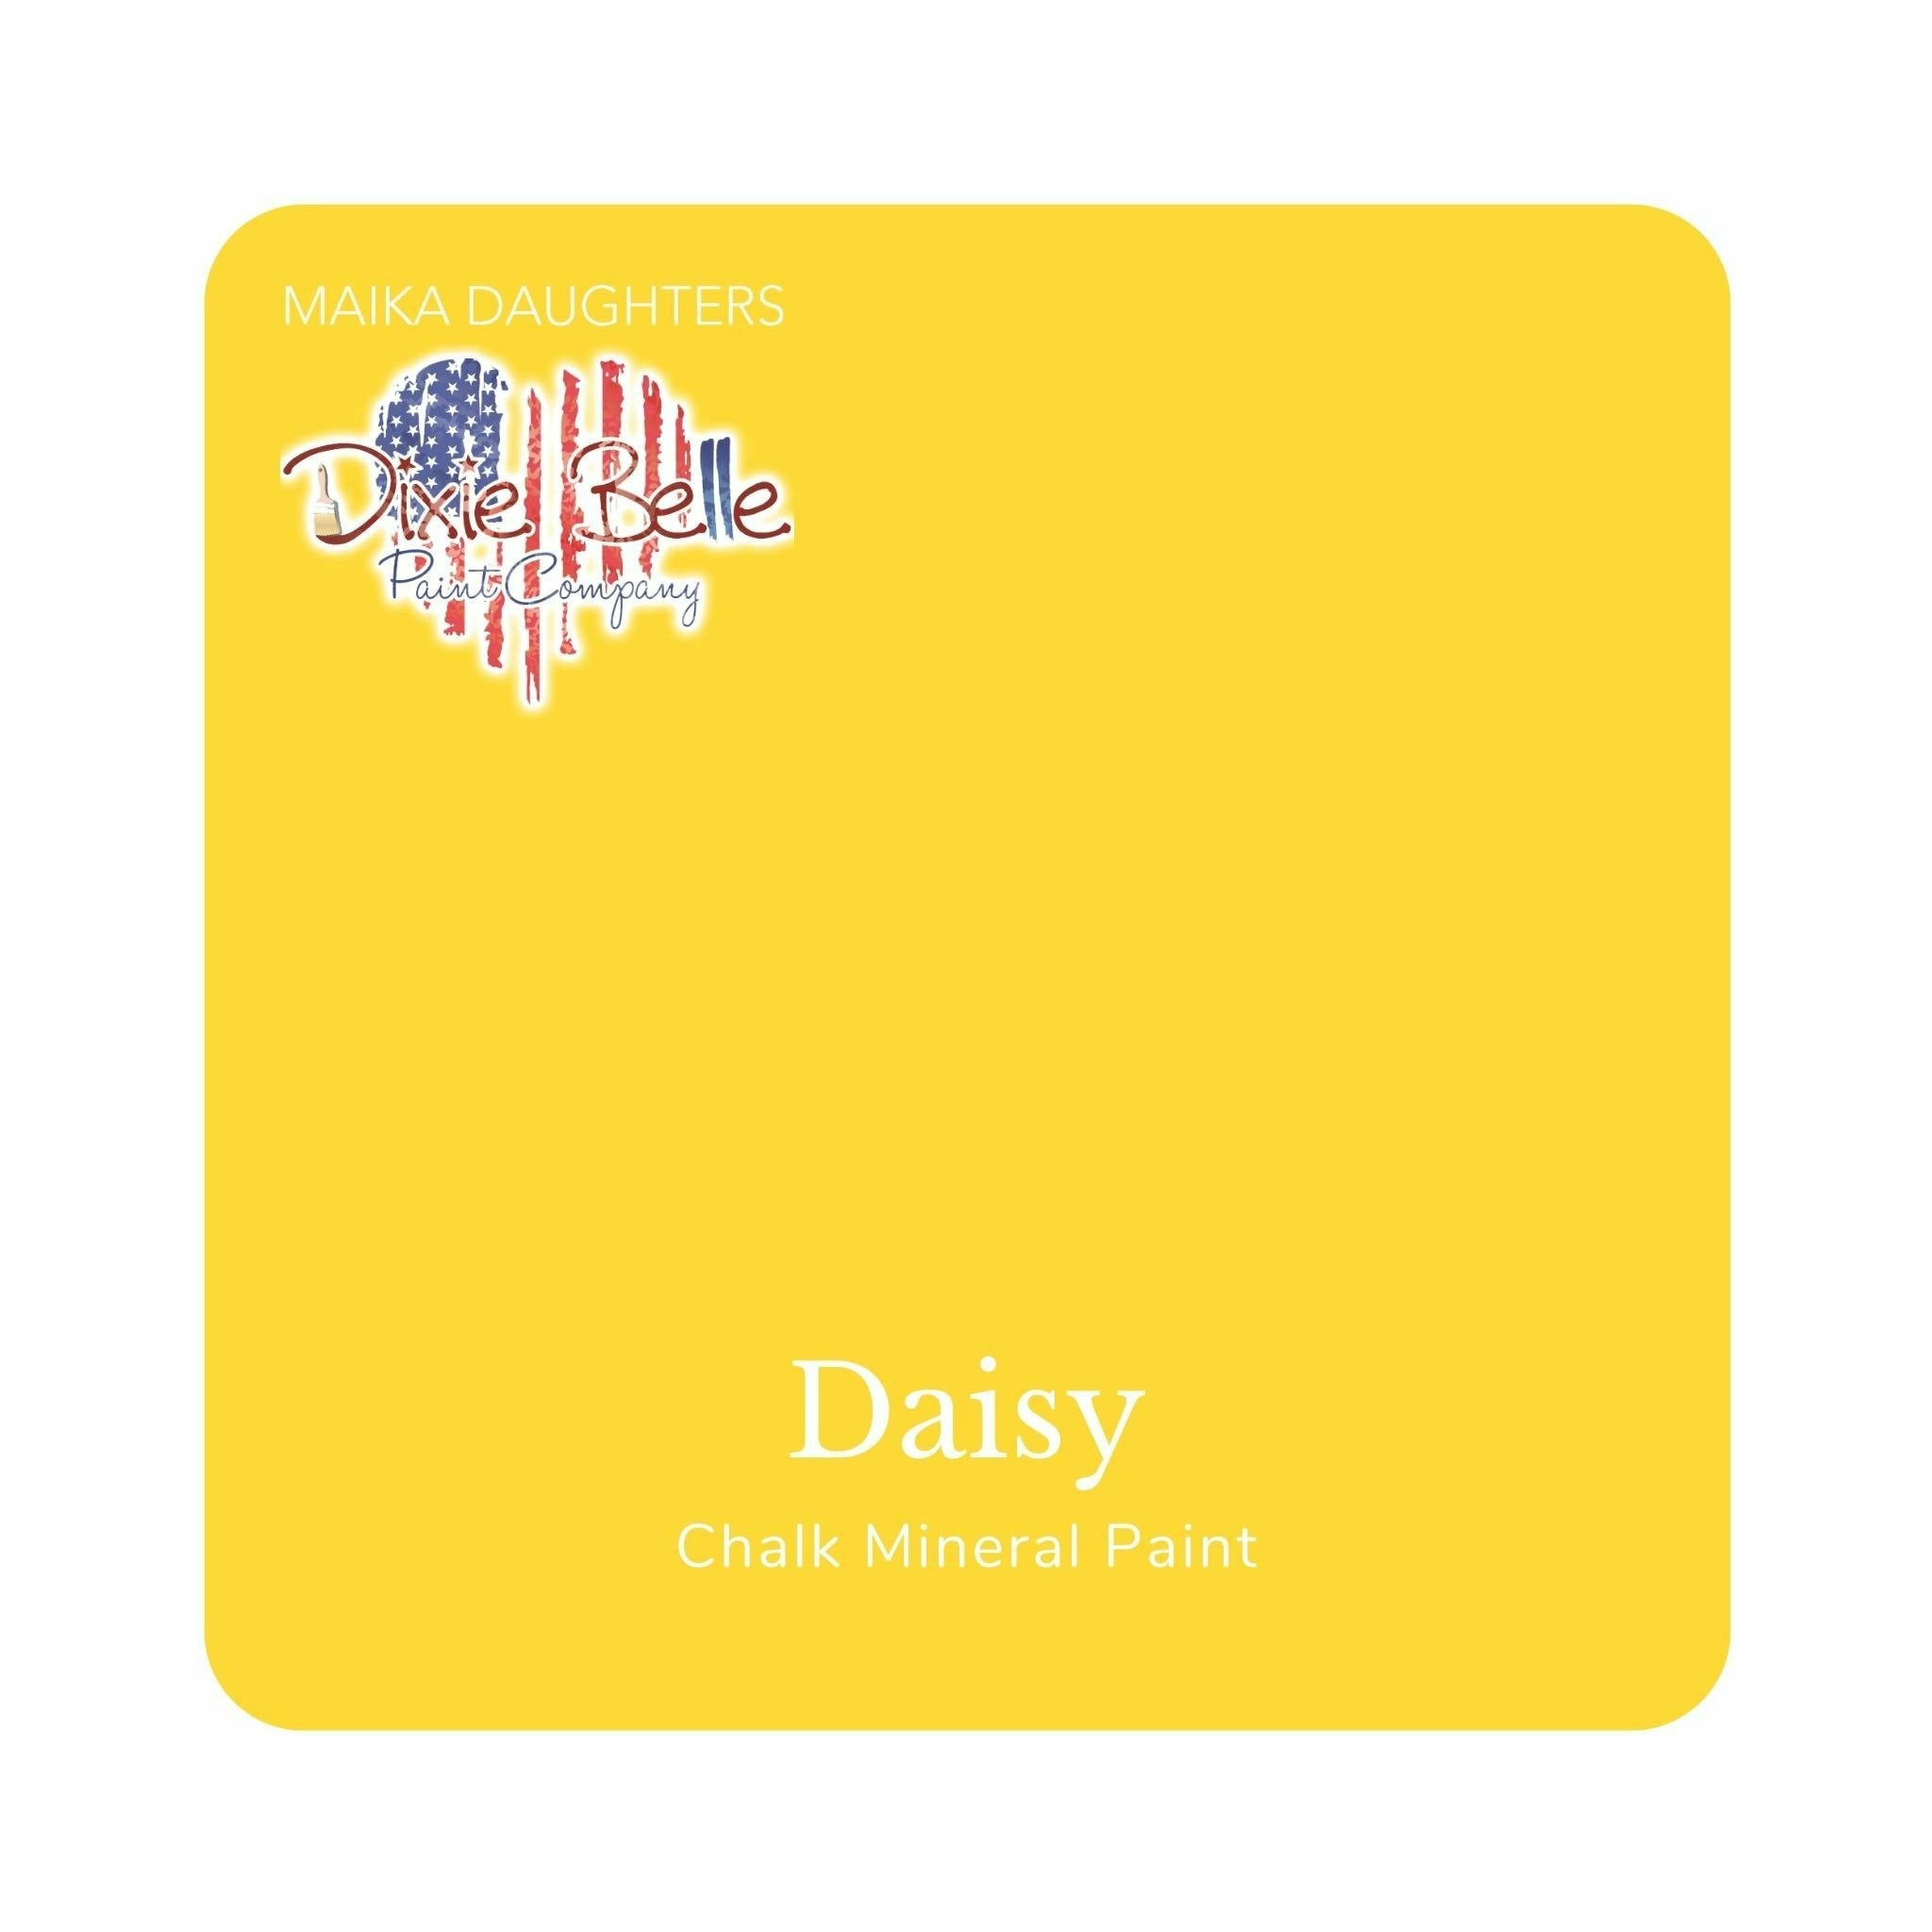 A square swatch card of Dixie Belle Paint Company’s Daisy Chalk Mineral Paint is against a white background. This color is a bright yellow.